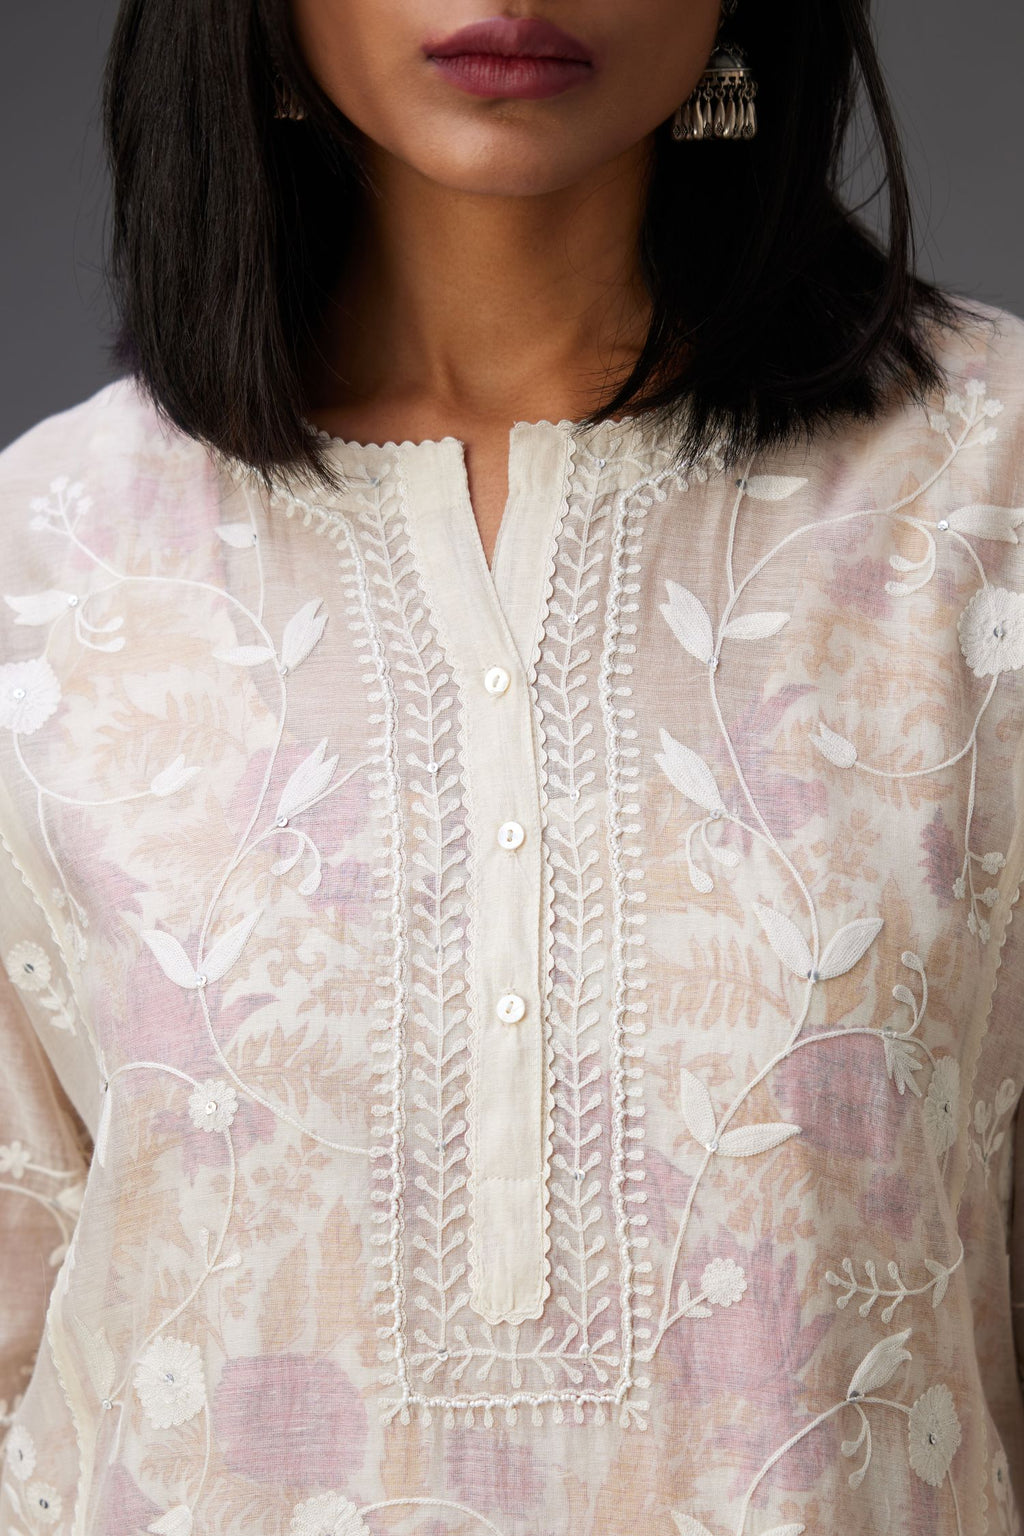 Off-white cotton chanderi kurta set with all-over jaal embroidery and small assorted flowers embroidery at side panells, highlighted with sequins handwork.